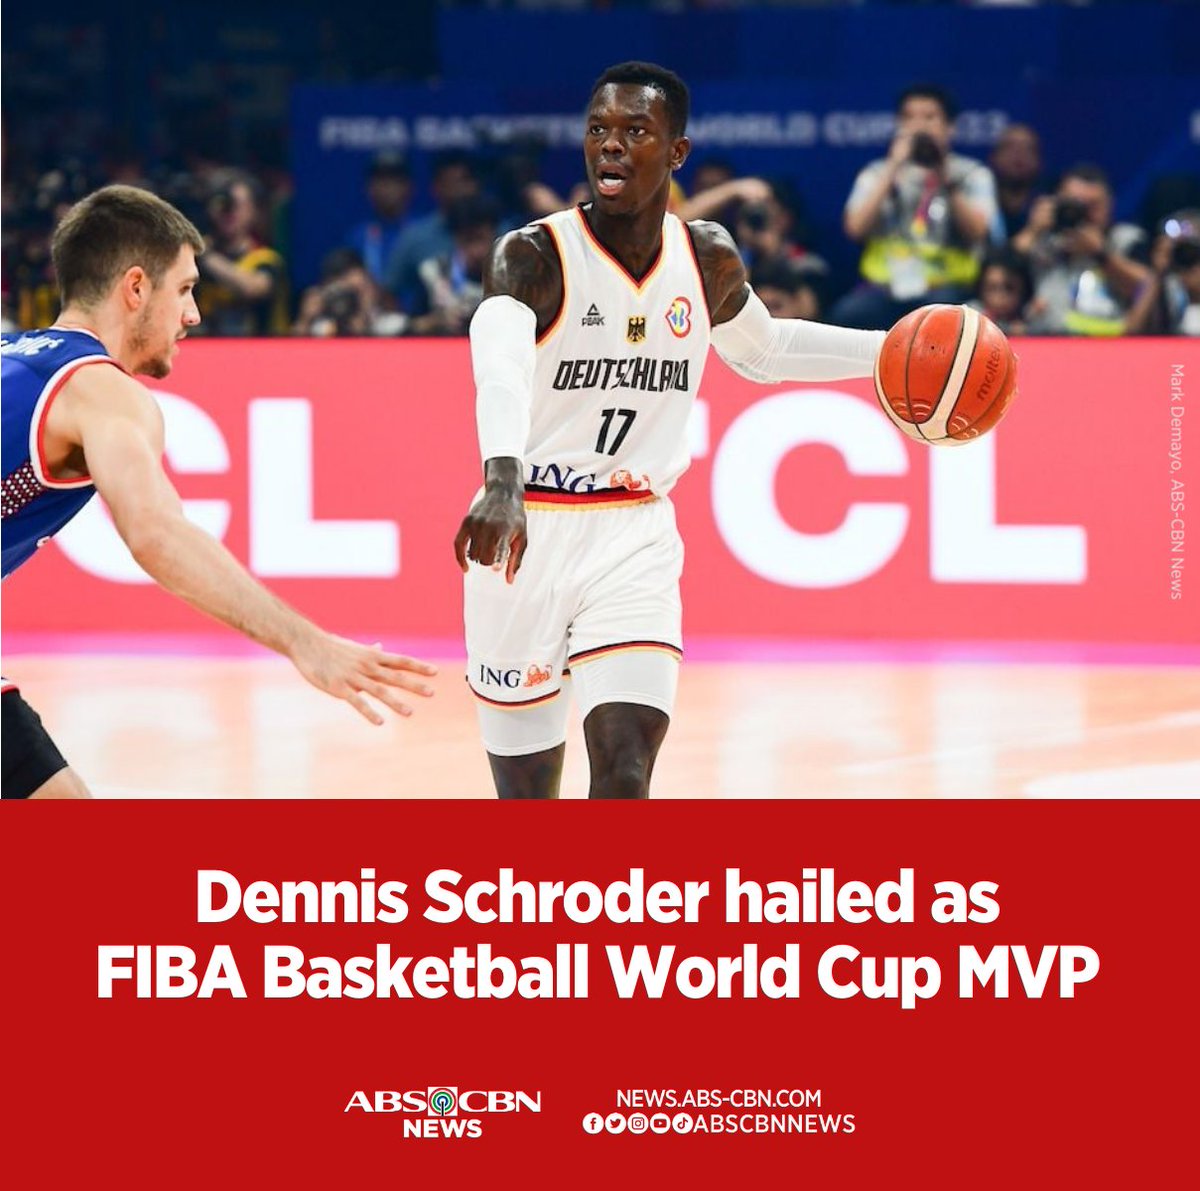 Dennis Schroder is the 2023 FIBA Basketball World Cup MVP after leading Germany to its first-ever #FIBAWC title. Related story: news.abs-cbn.com/sports/09/10/2…